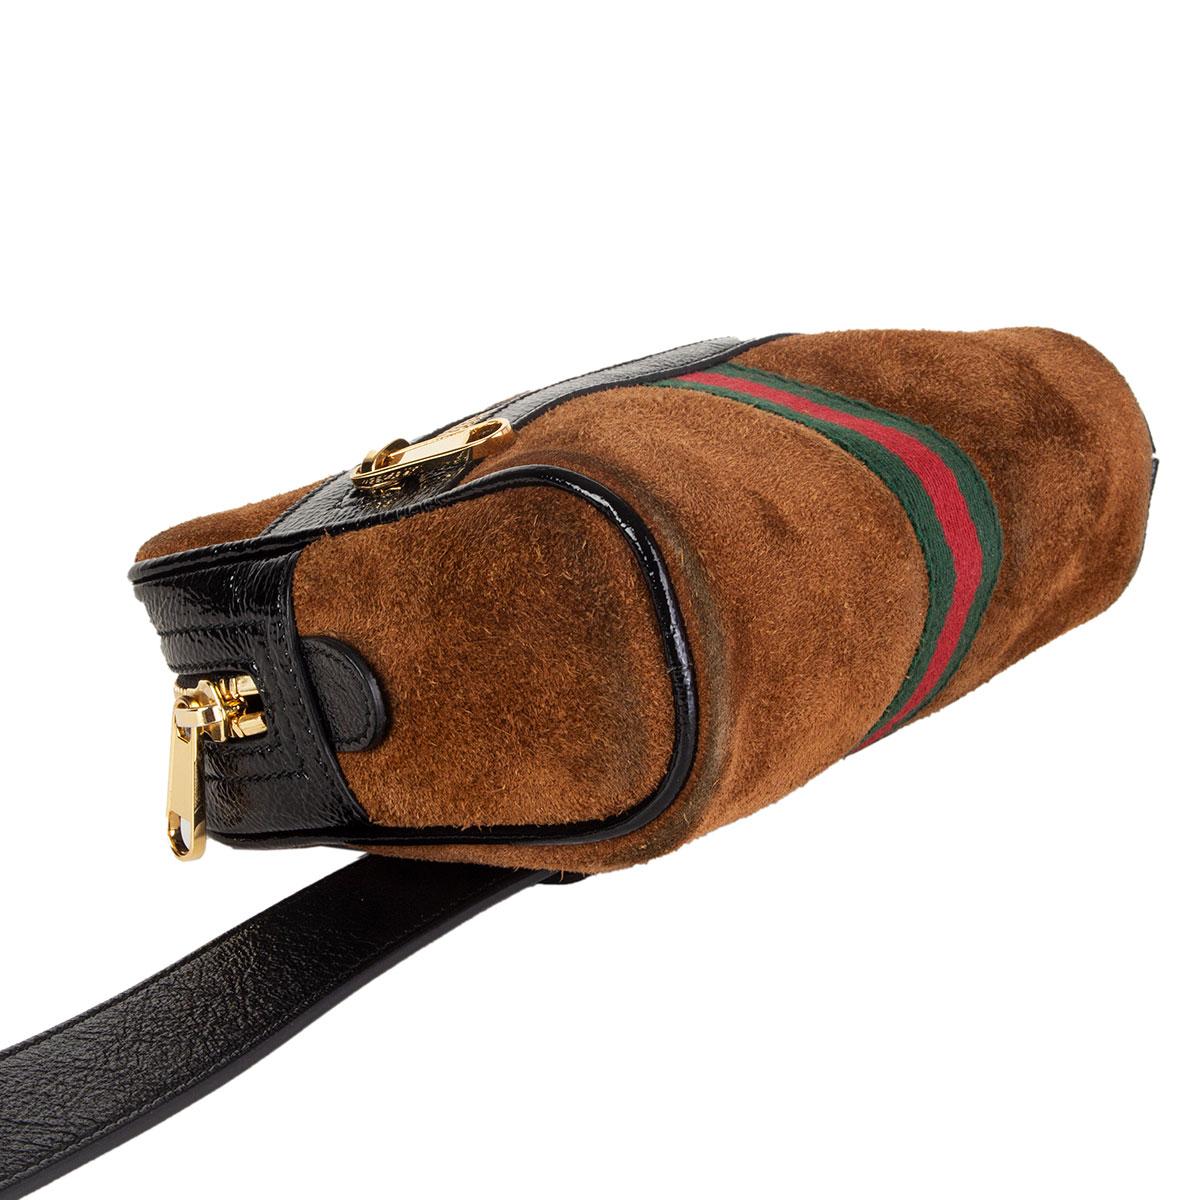 gucci suede fanny pack